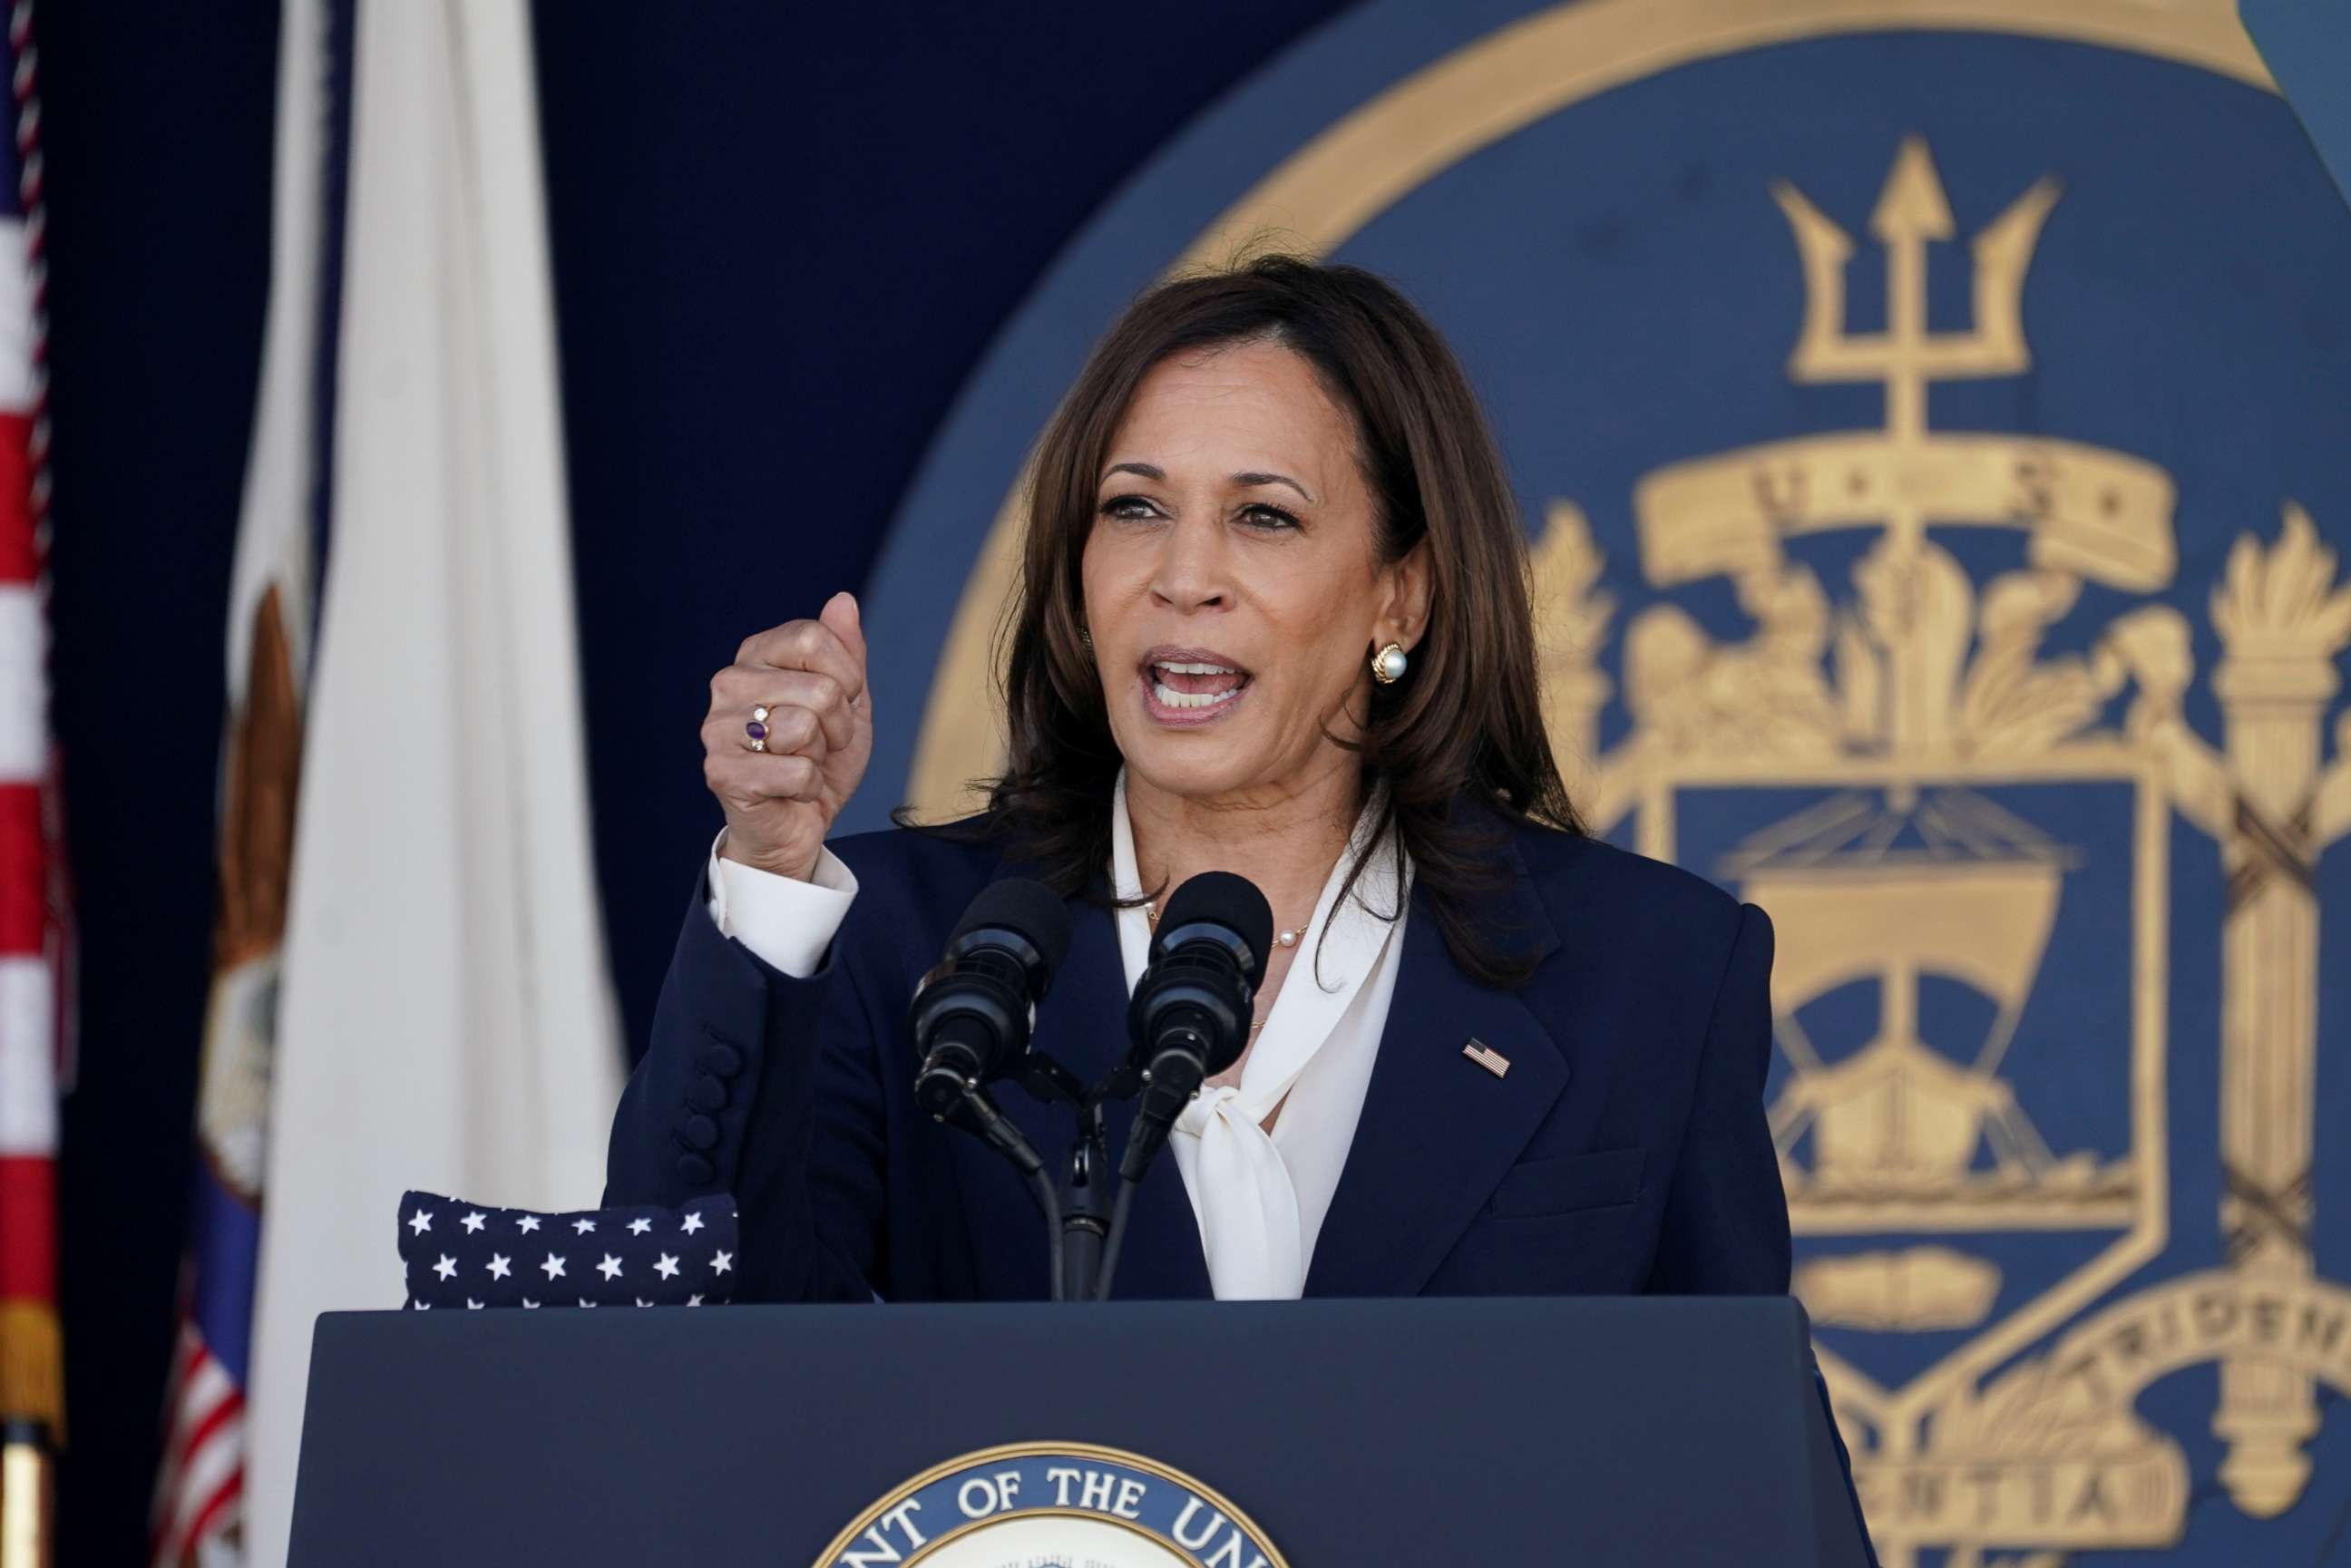 PHOTO: Vice President Kamala Harris gestures as she delivers remarks at the graduation and commissioning ceremony for the U.S. Naval Academy's Class of 2021 at the U.S. Naval Academy in Annapolis, Md., May 28, 2021.